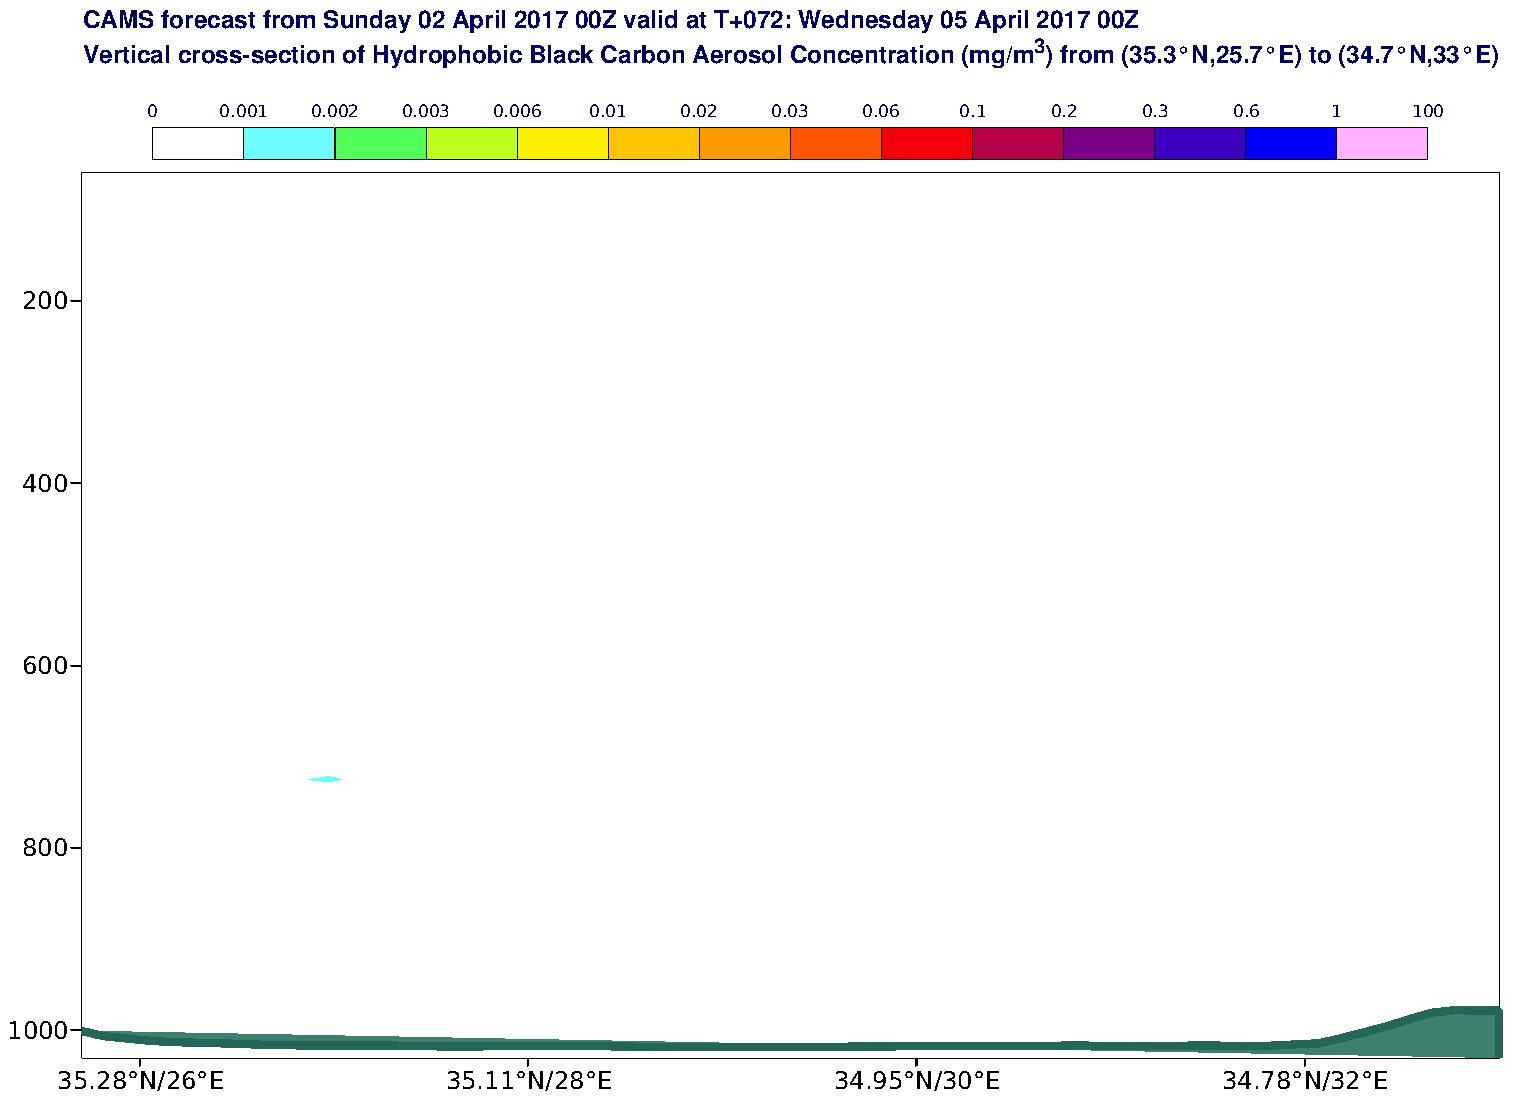 Vertical cross-section of Hydrophobic Black Carbon Aerosol Concentration (mg/m3) valid at T72 - 2017-04-05 00:00